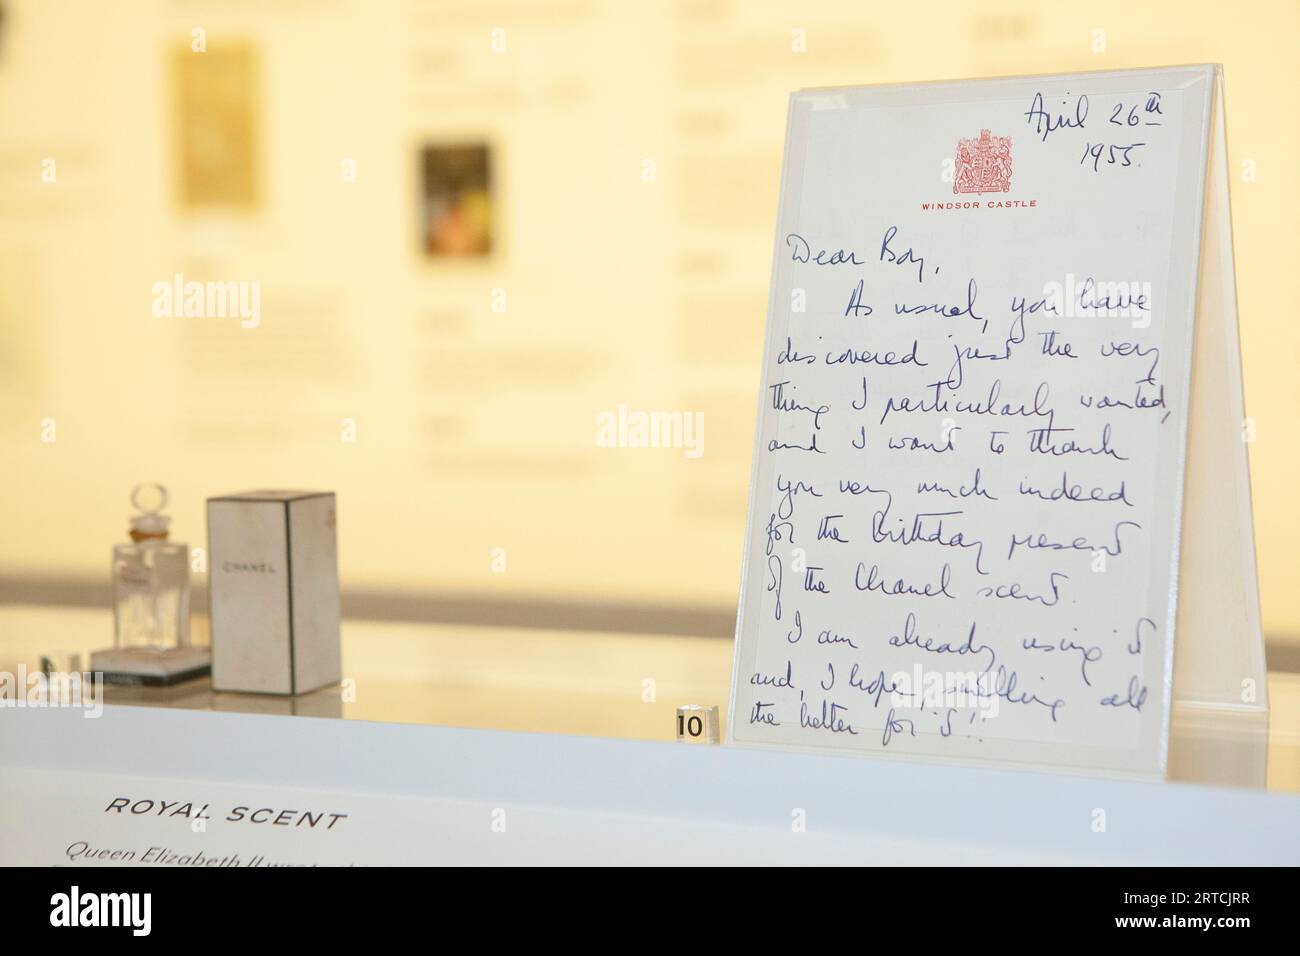 EMBARGO until 1 minute past MIDNIGHT 12 SEPT London, UK. 12th Sep, 2023. A new exhibition, 'Gabrielle Chanel: Fashion Manifesto' opens at V&A, highlighting her connections to British clients and manufacturing. Queen Elizabeth II wrote this note thanking a family friend, Frederick 'Boy' Browning, husband of novelist Daphne du Maurier, for a bottle of Chanel No 5 he gave her for her birthday in 1955. Credit: Anna Watson/Alamy Live News Stock Photo